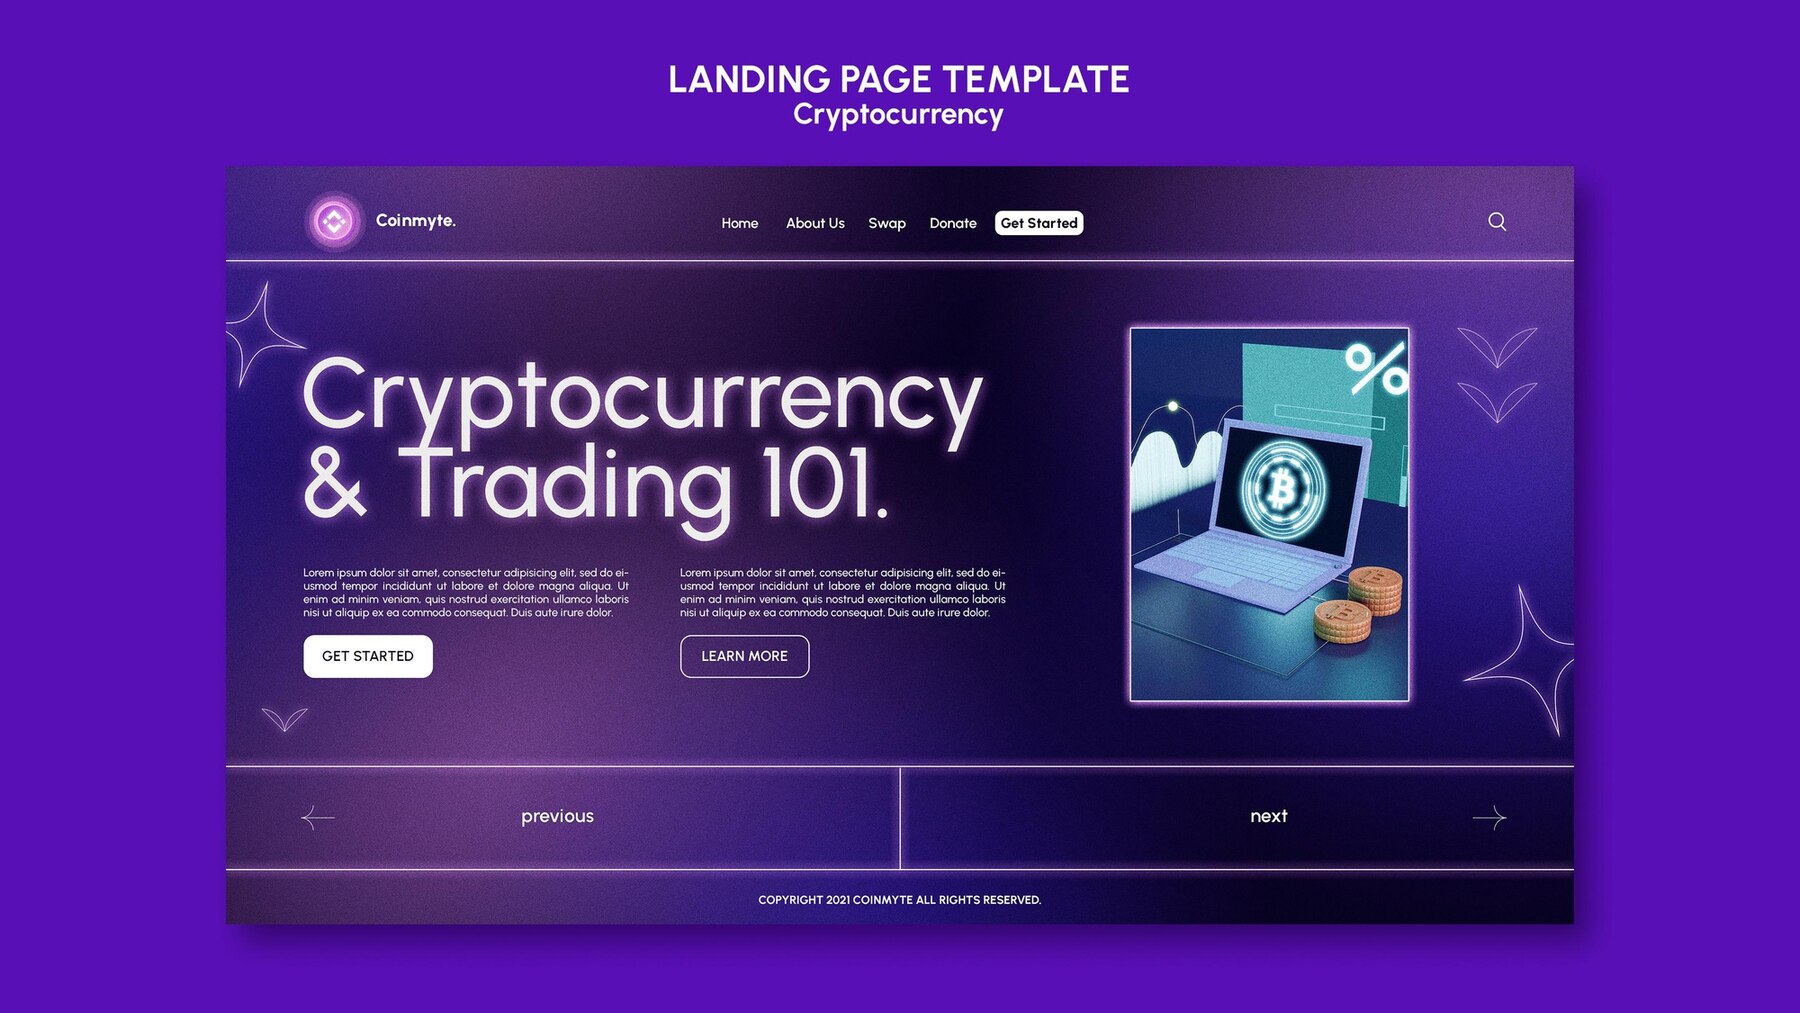 cryptocurrency-design-template-landing-page_23-2149112834.jpg